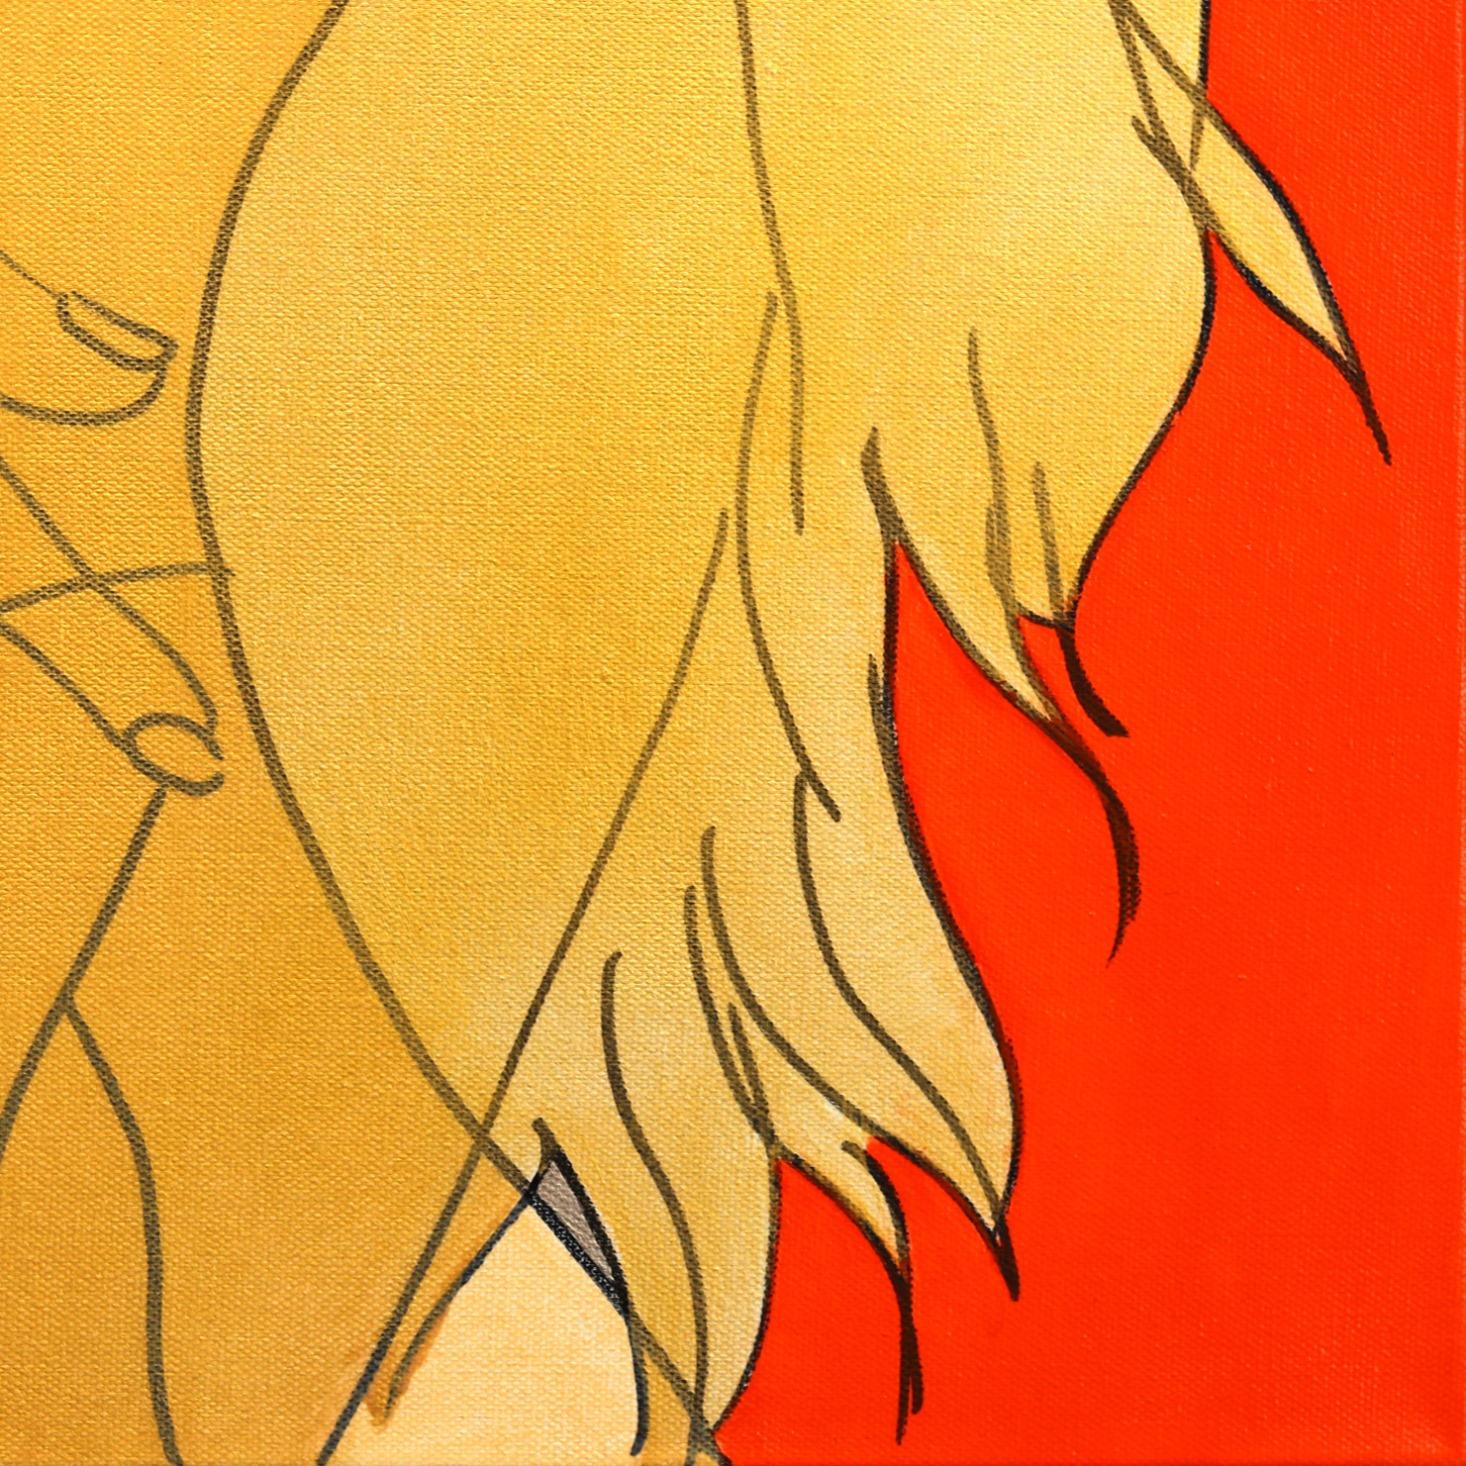 Untitled (Fire III) - Figurative Portrait Red and Yellow Woman Pop Art Painting For Sale 3